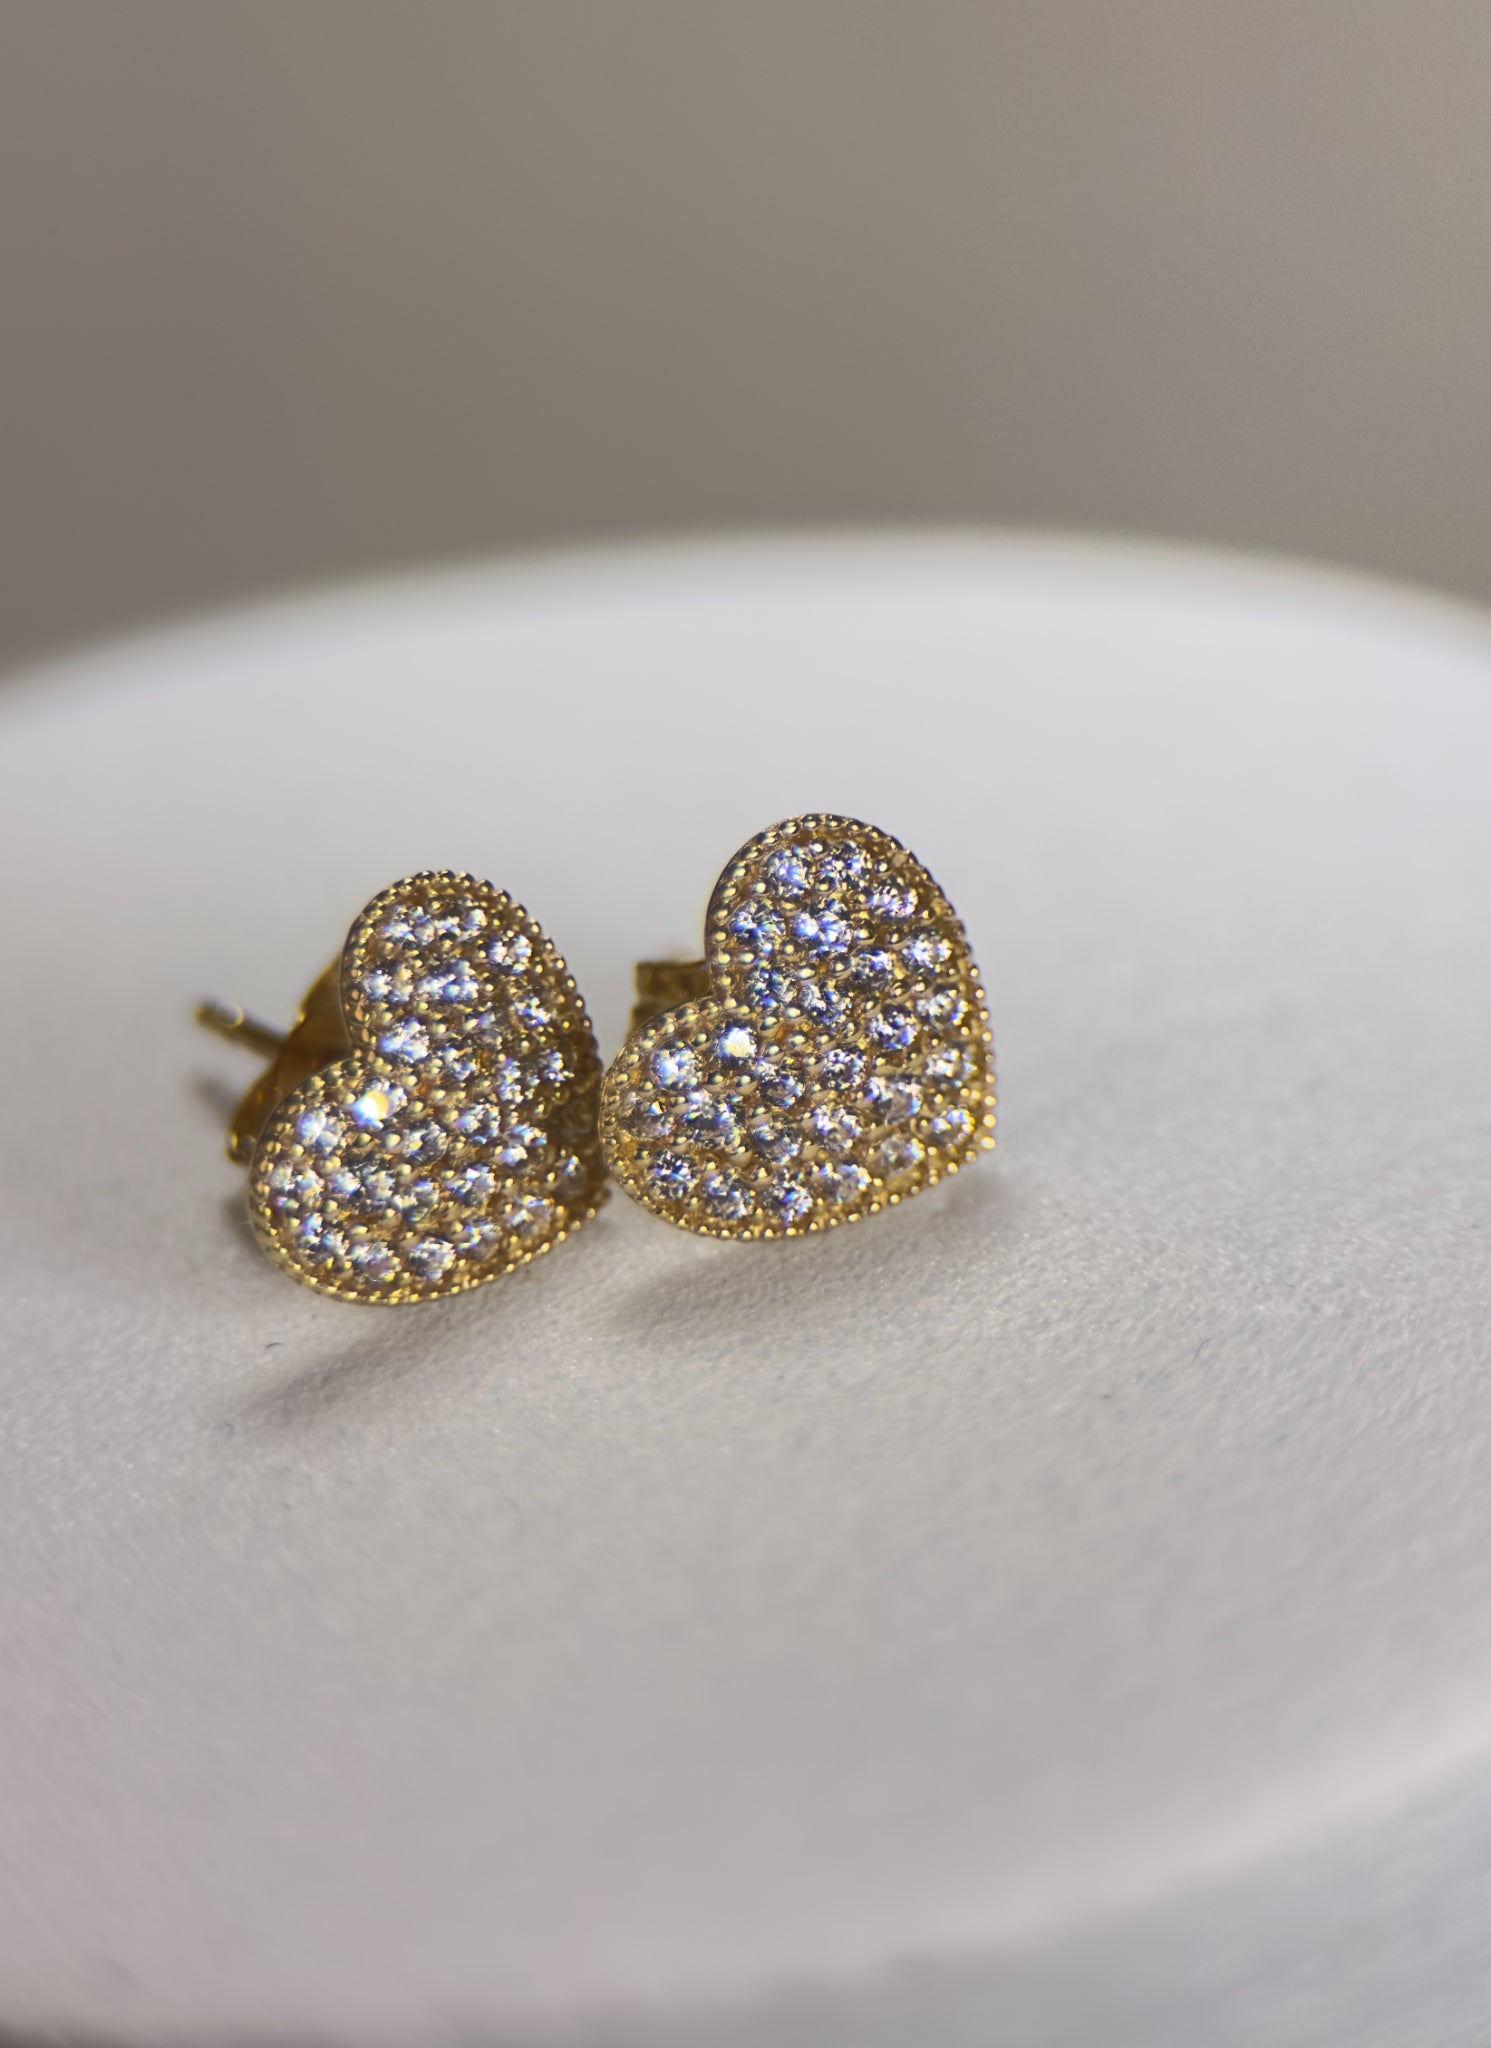 DR2365 - 14K Yellow Gold - Lab Created Stones - 14K Gold Studs - Hearts